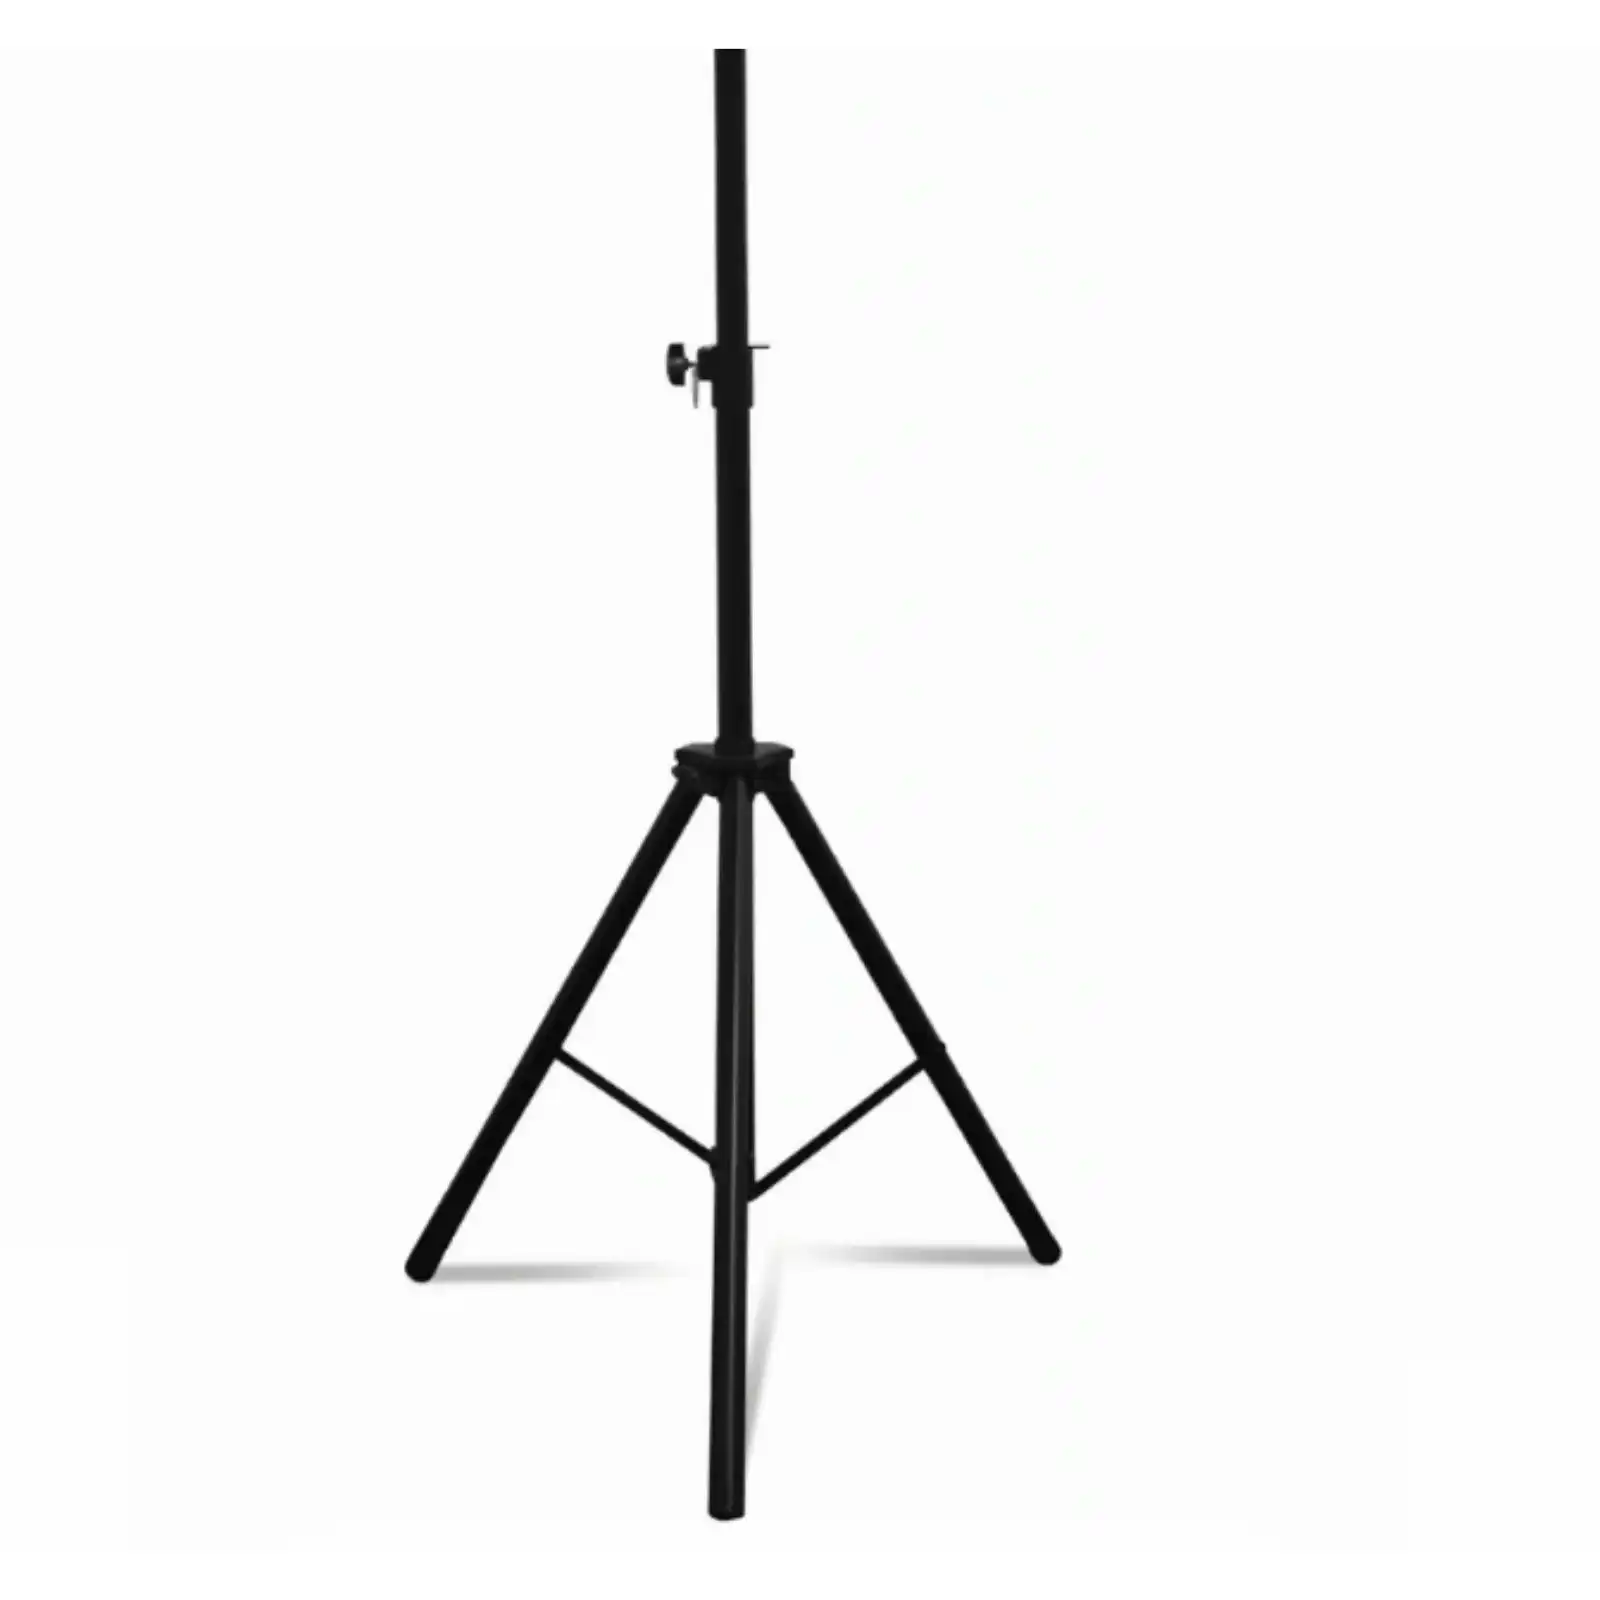 Hotto Infrared Heater Tripod Stand Height Adjustable - STAND ONLY